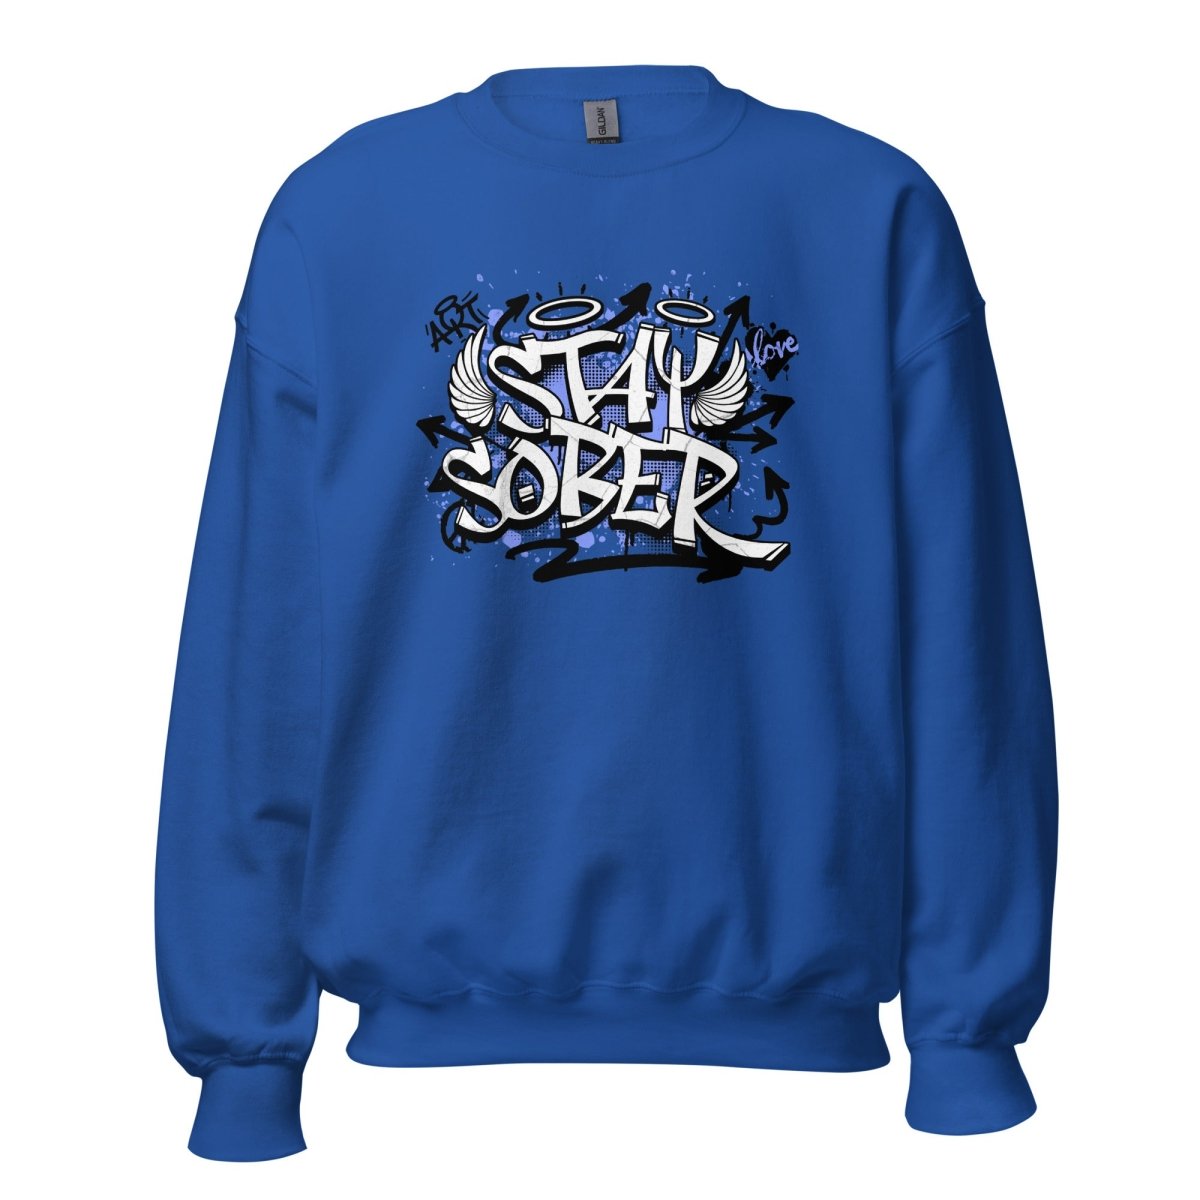 Stay Sober Graffiti Sweater: Embrace Clarity and Empowerment - Sobervation